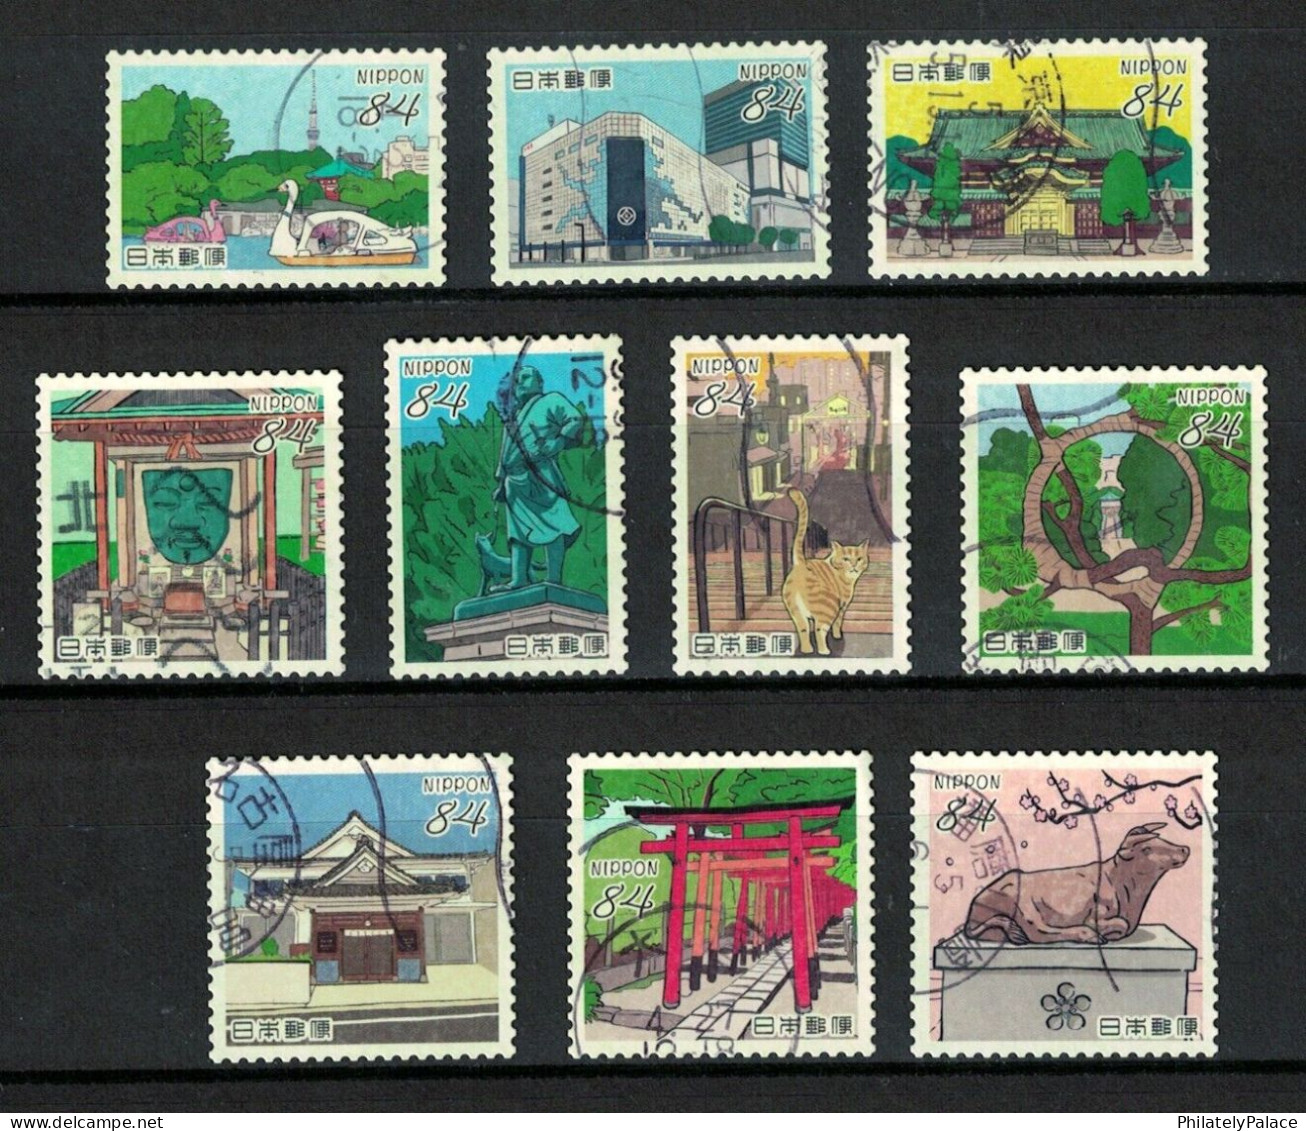 JAPAN 2023 EDO TOKYO SERIES PART III 84 YEN COMP. SET OF 10 ,CAT,TEMPLE,OX,DUCK,MASK,ARCHITECTURE,USED (**) - Usados